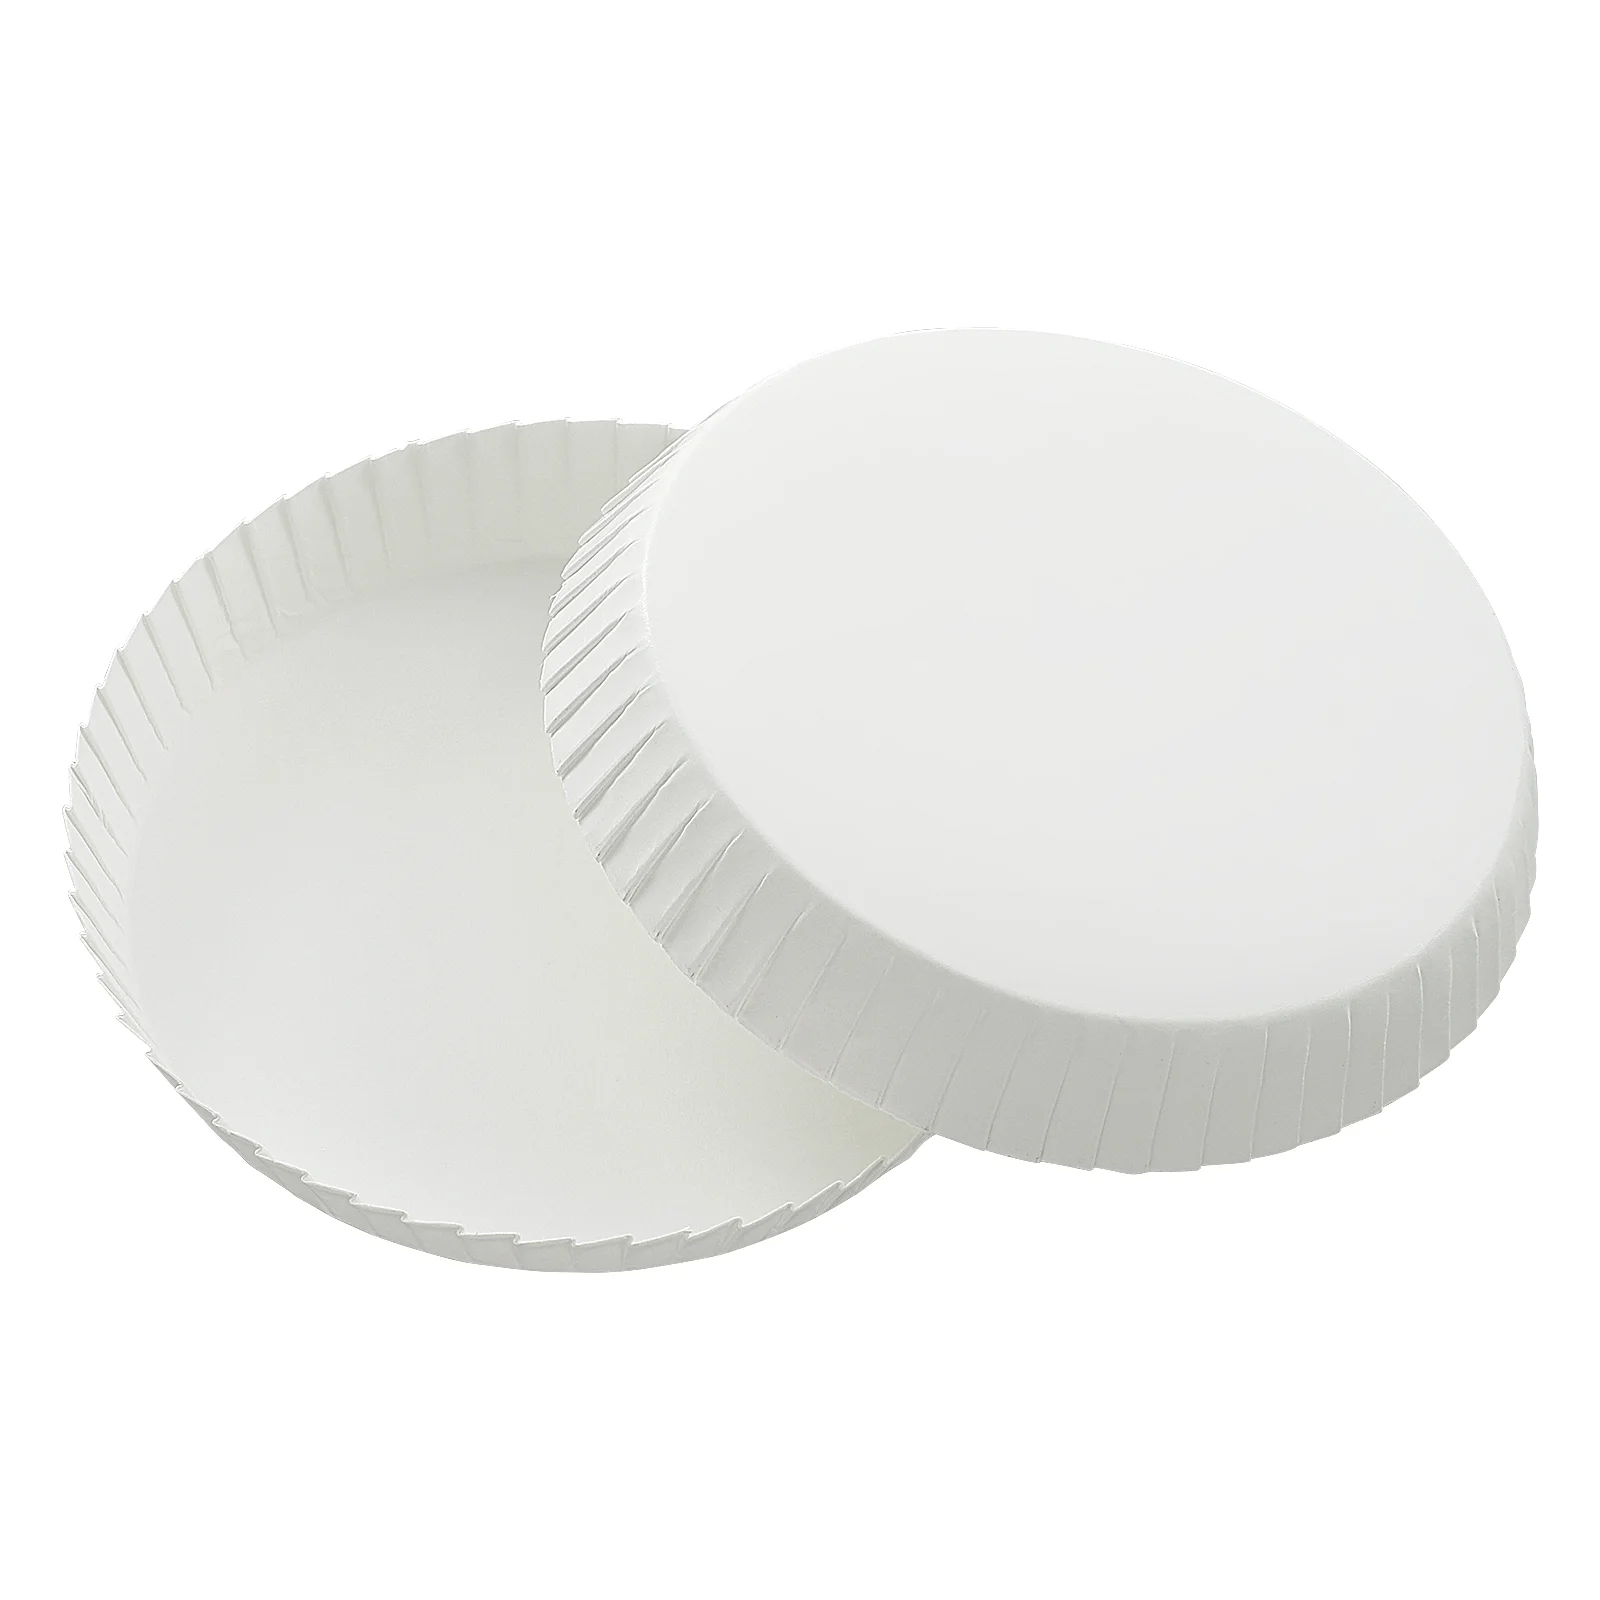 

Cup Lids Covers Paper Cover Coffee Lid Disposabledrinks Drink Drinking Hot Cups Hotelcap Outside Recycle Recycled White Wide